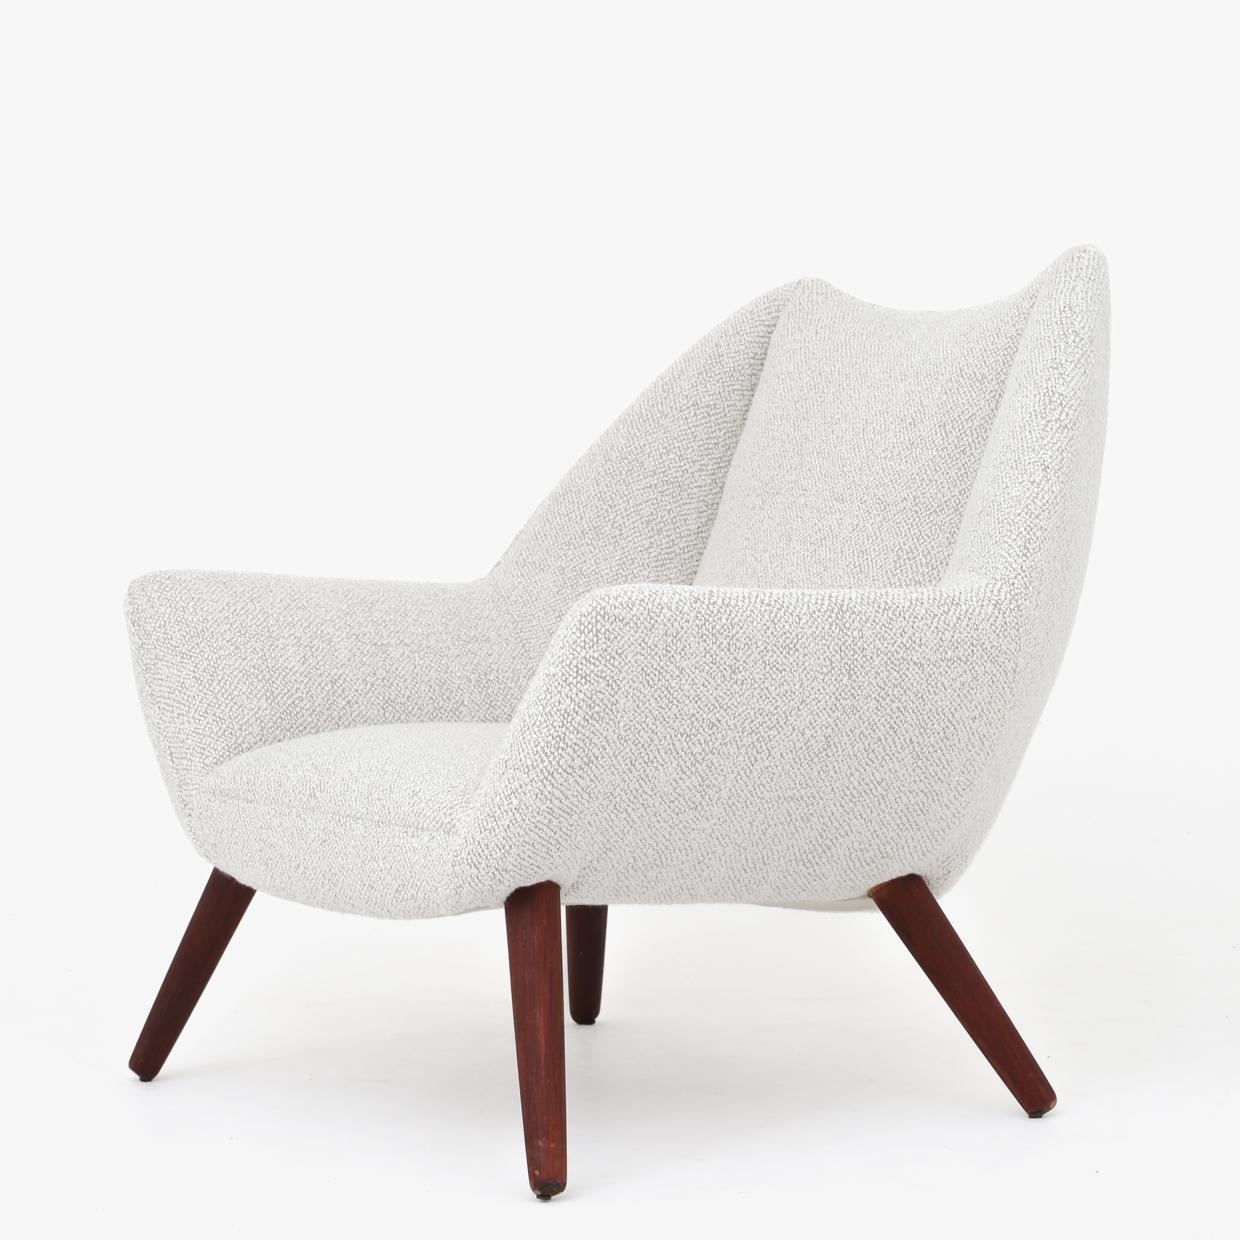 Model 12 - Reupholstered easy chair with matching stool with legs in teak and upholstery in light textile (Bridget Meringue 001). Designed in 1961. Maker Schillers Polstermøbelfabrik.